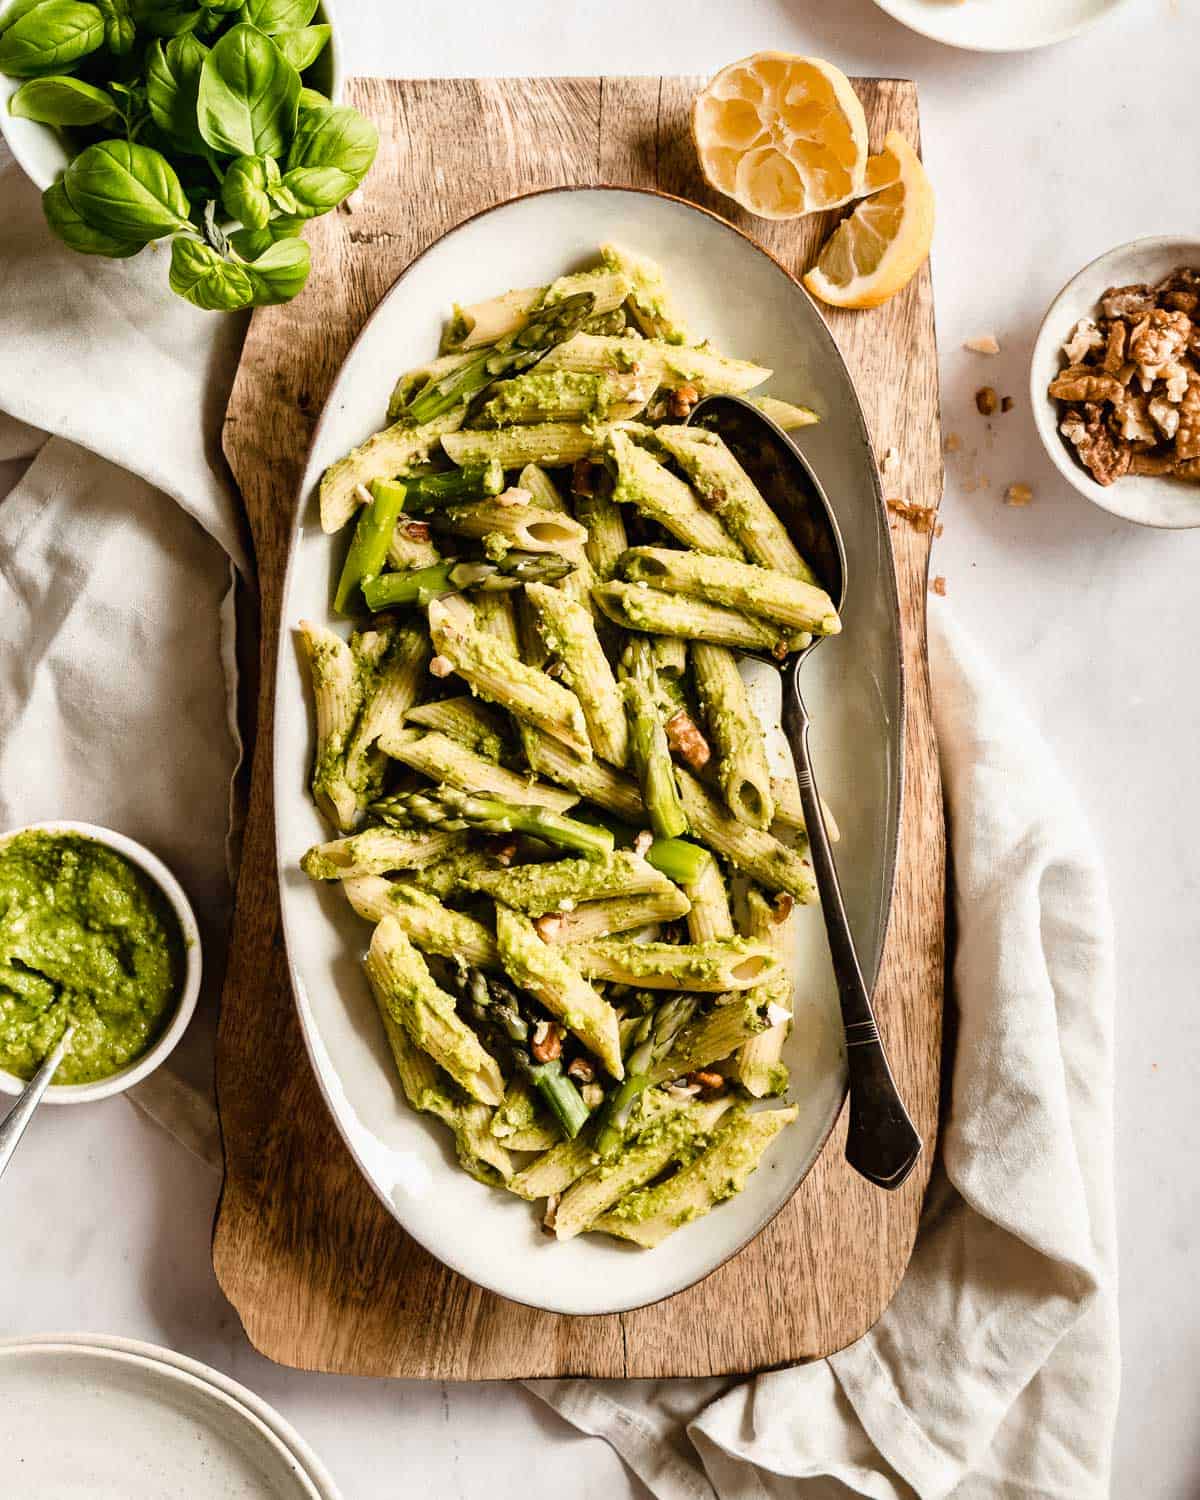 big plate of penne pasta topped with walnut pesto and cooked asparagus.